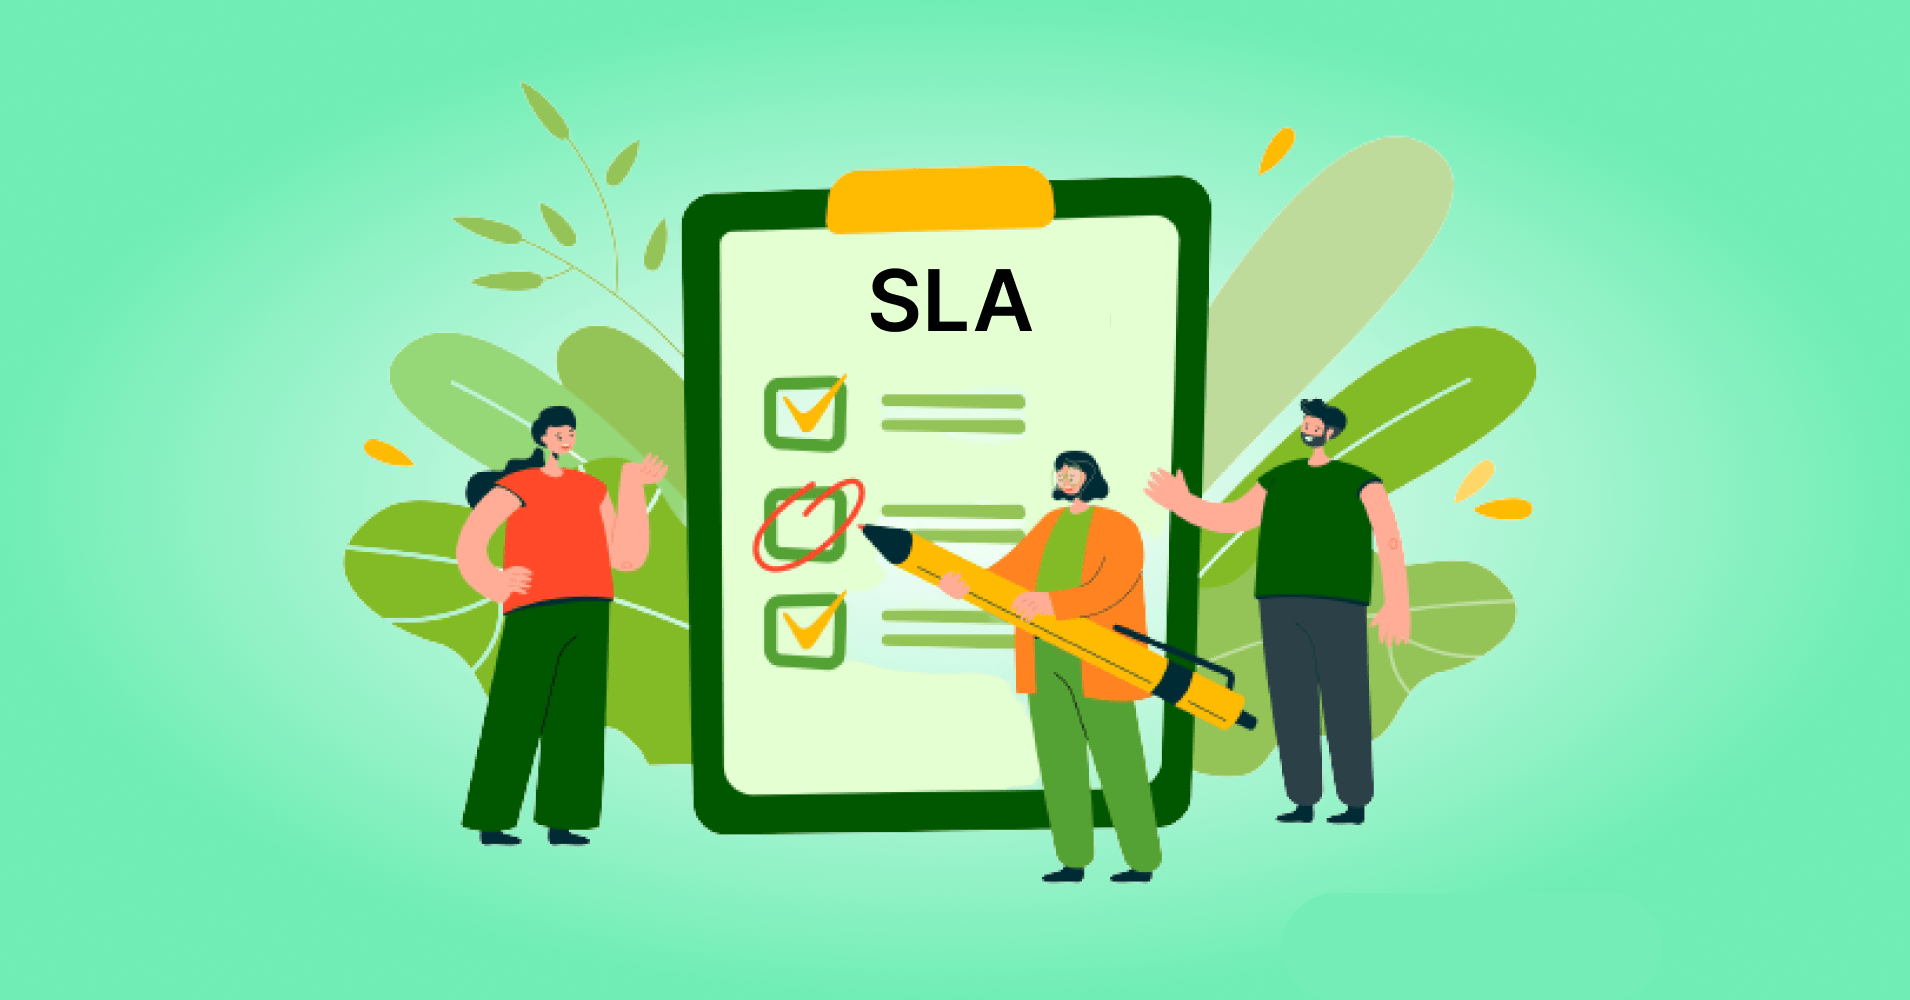 sla or service level agreement with examples